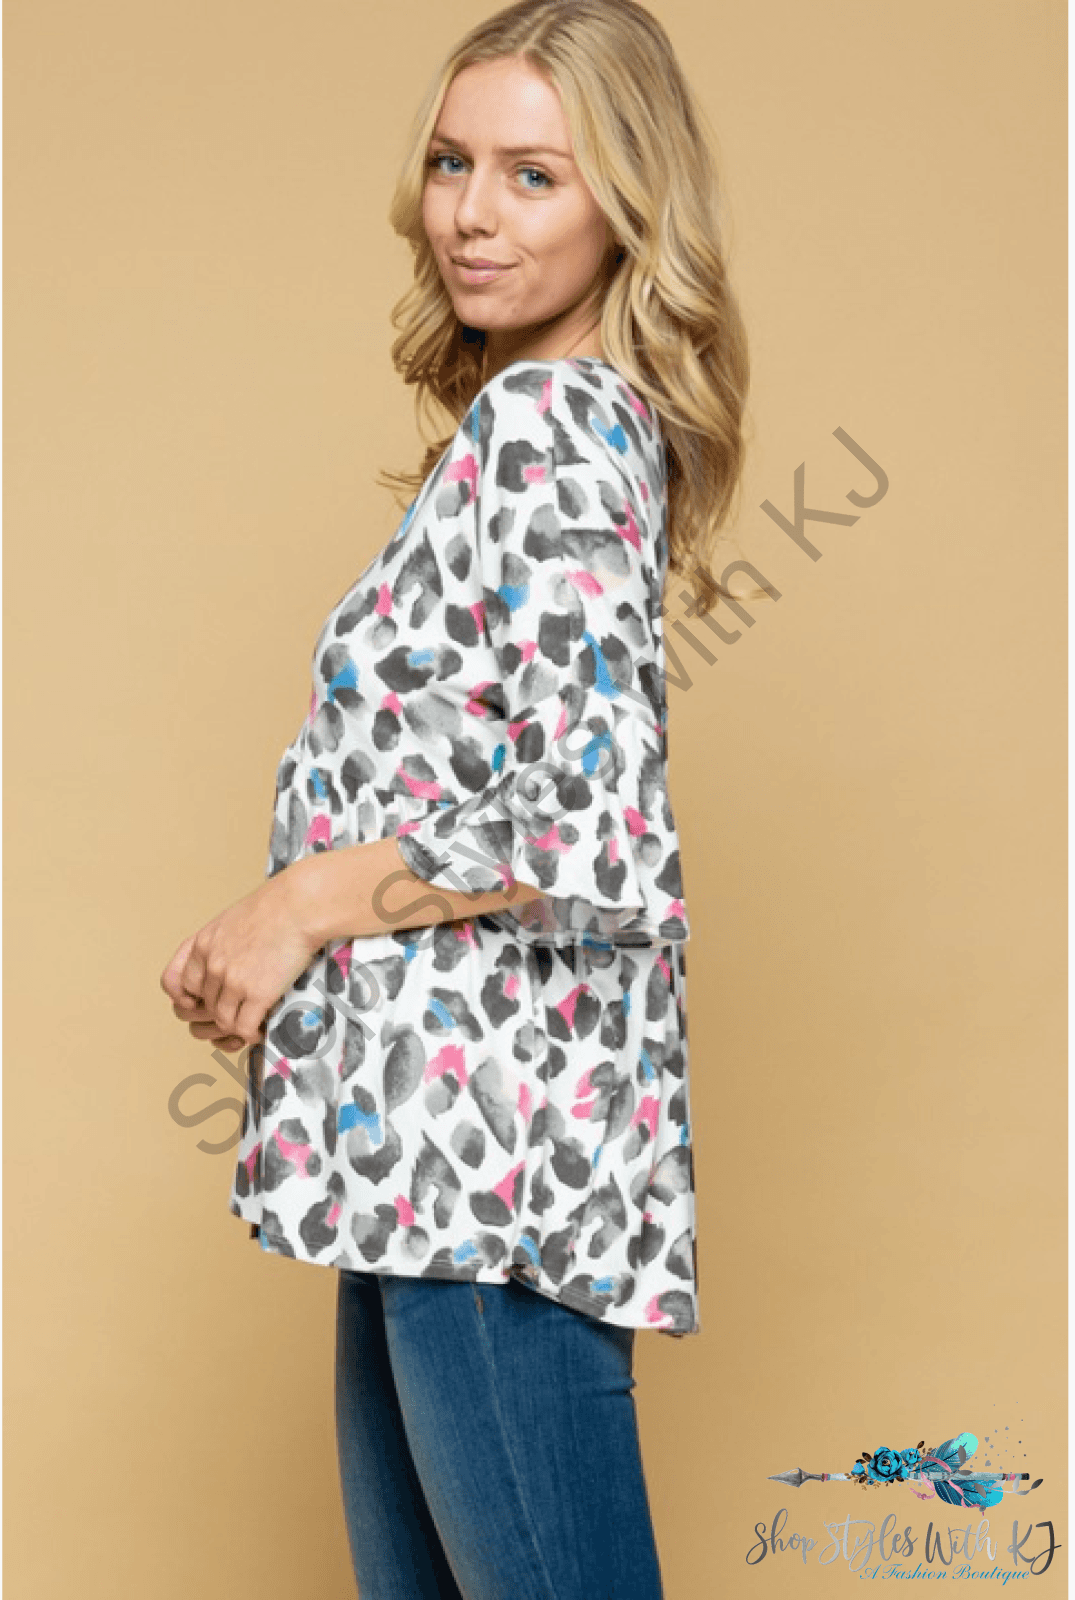 Nwt Colored Leopard Babydoll Top - Size S Shirts & Tops